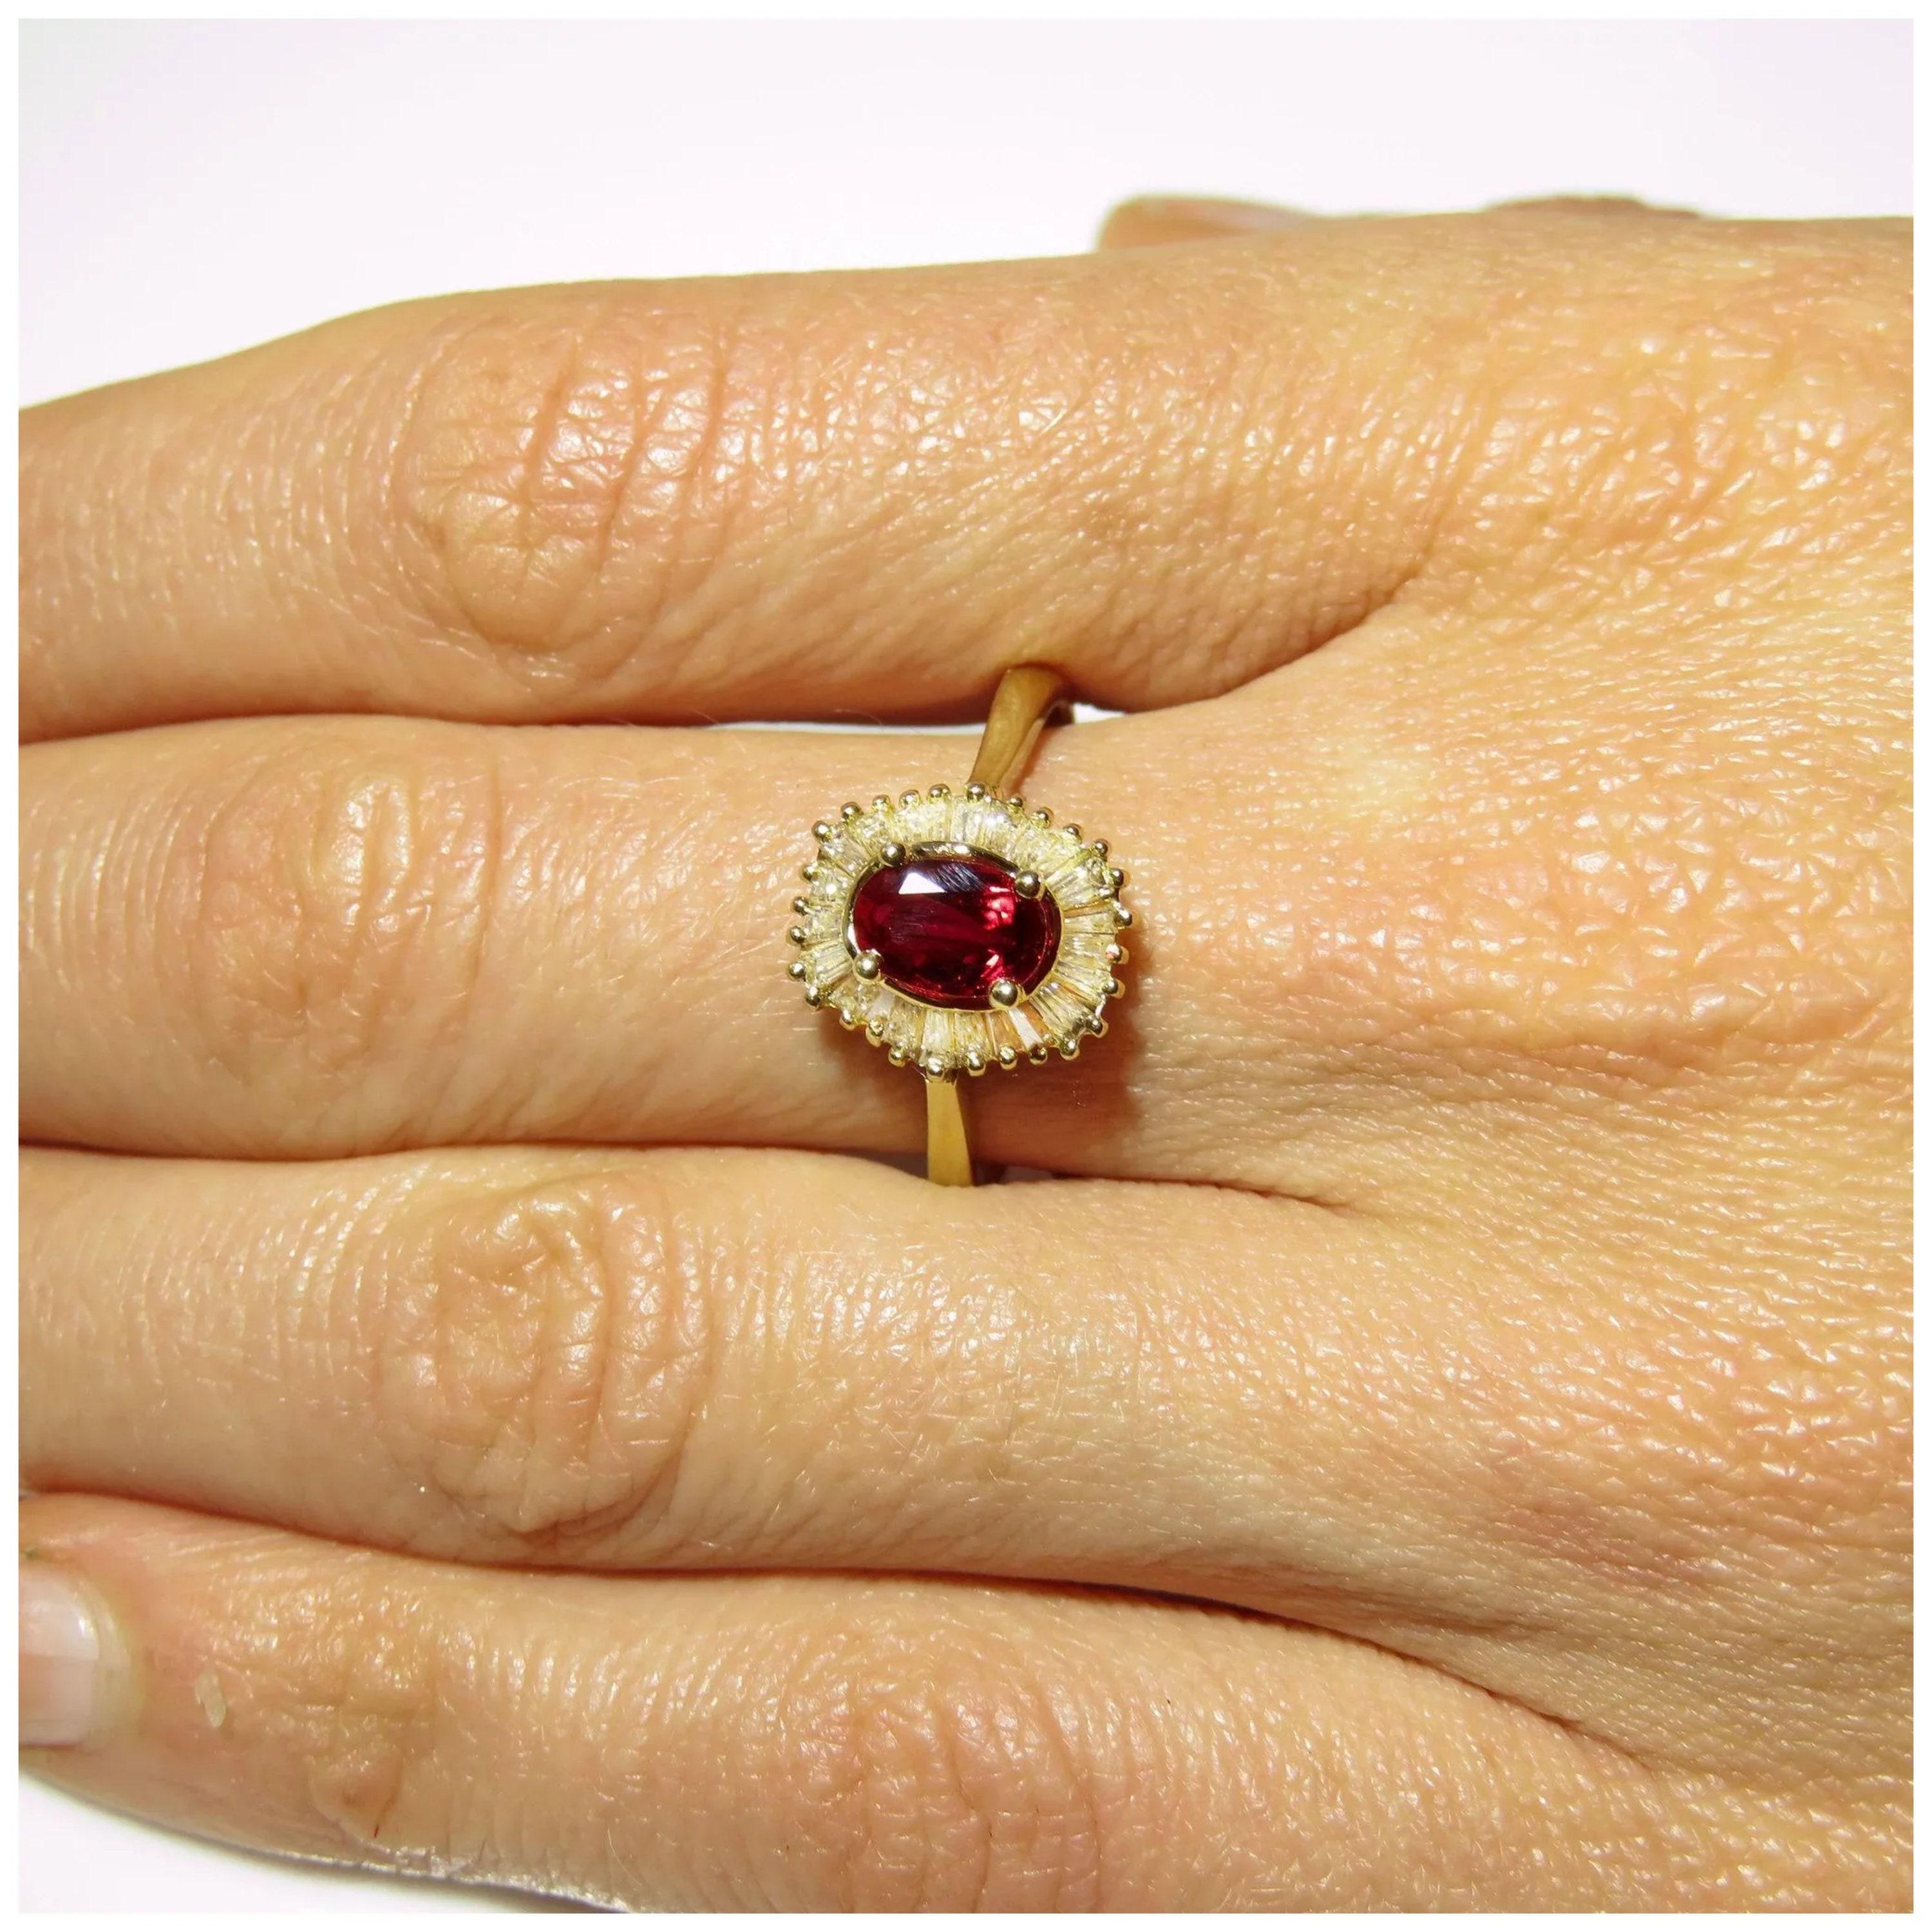 For Sale:  Certified 2.6 Carat Ruby Diamond Engagement Ring Halo Ruby Diamond Cocktail Ring 4